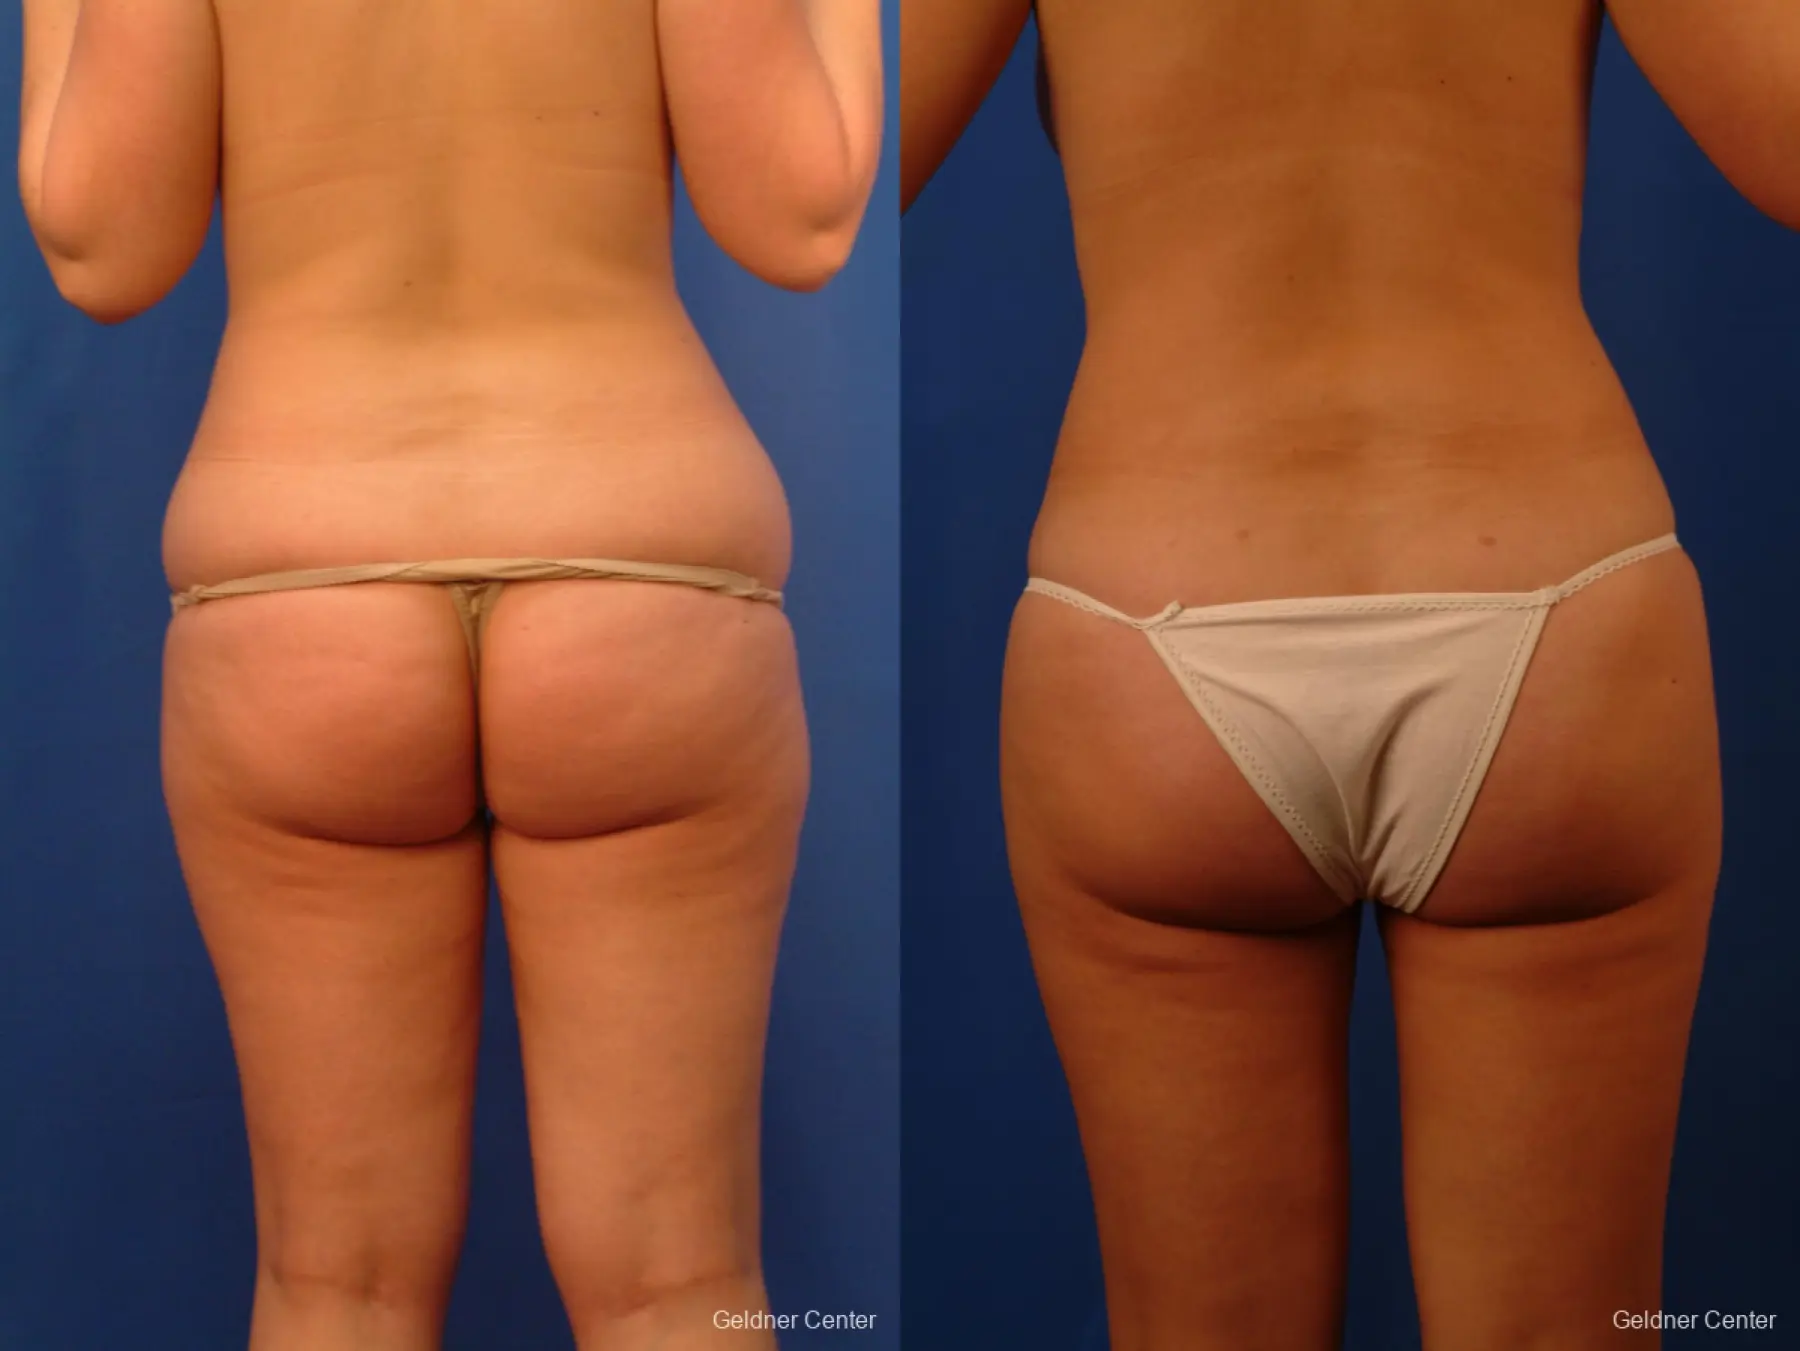 Vaser lipo patient 2516 before and after photos - Before and After 5